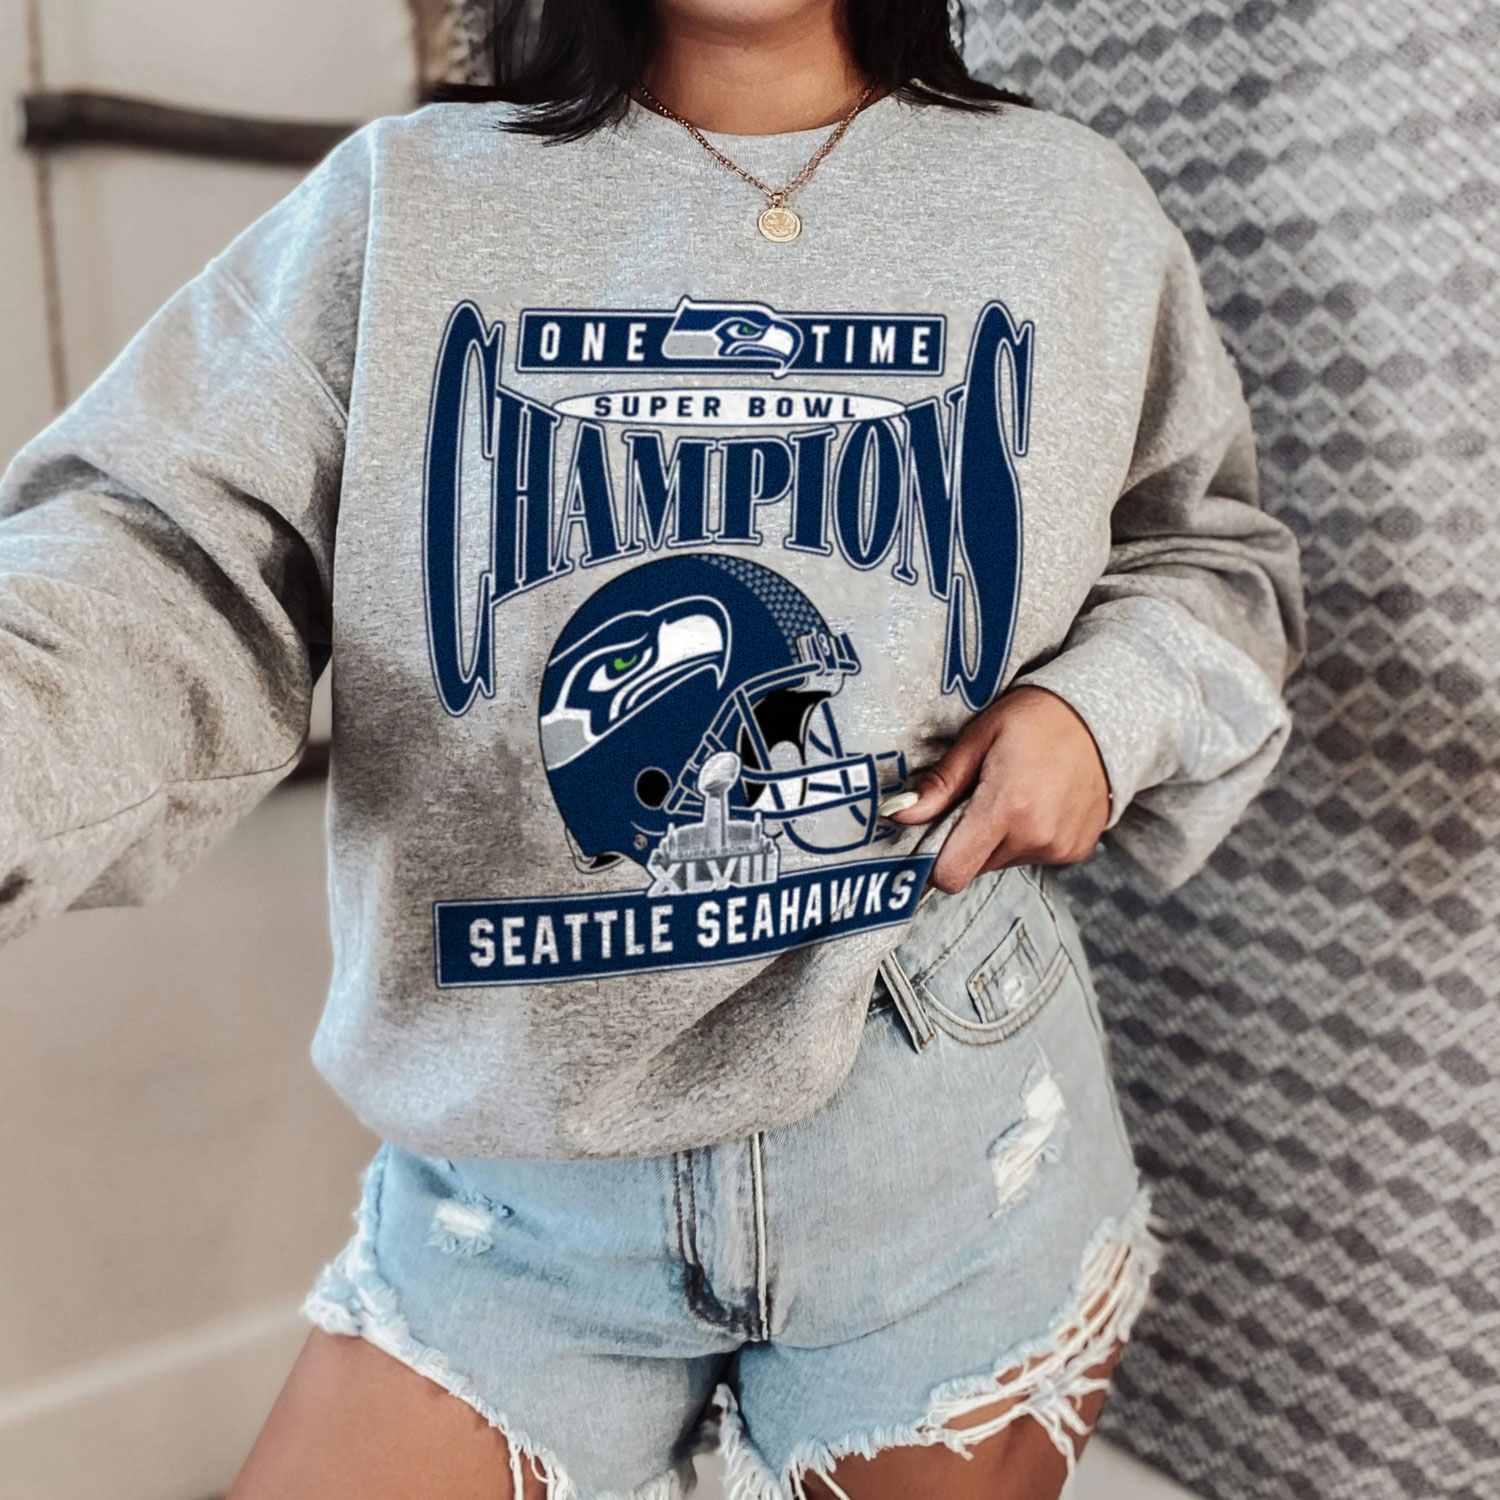 One Time Super Bowl Champions Seattle Seahawks T-Shirt